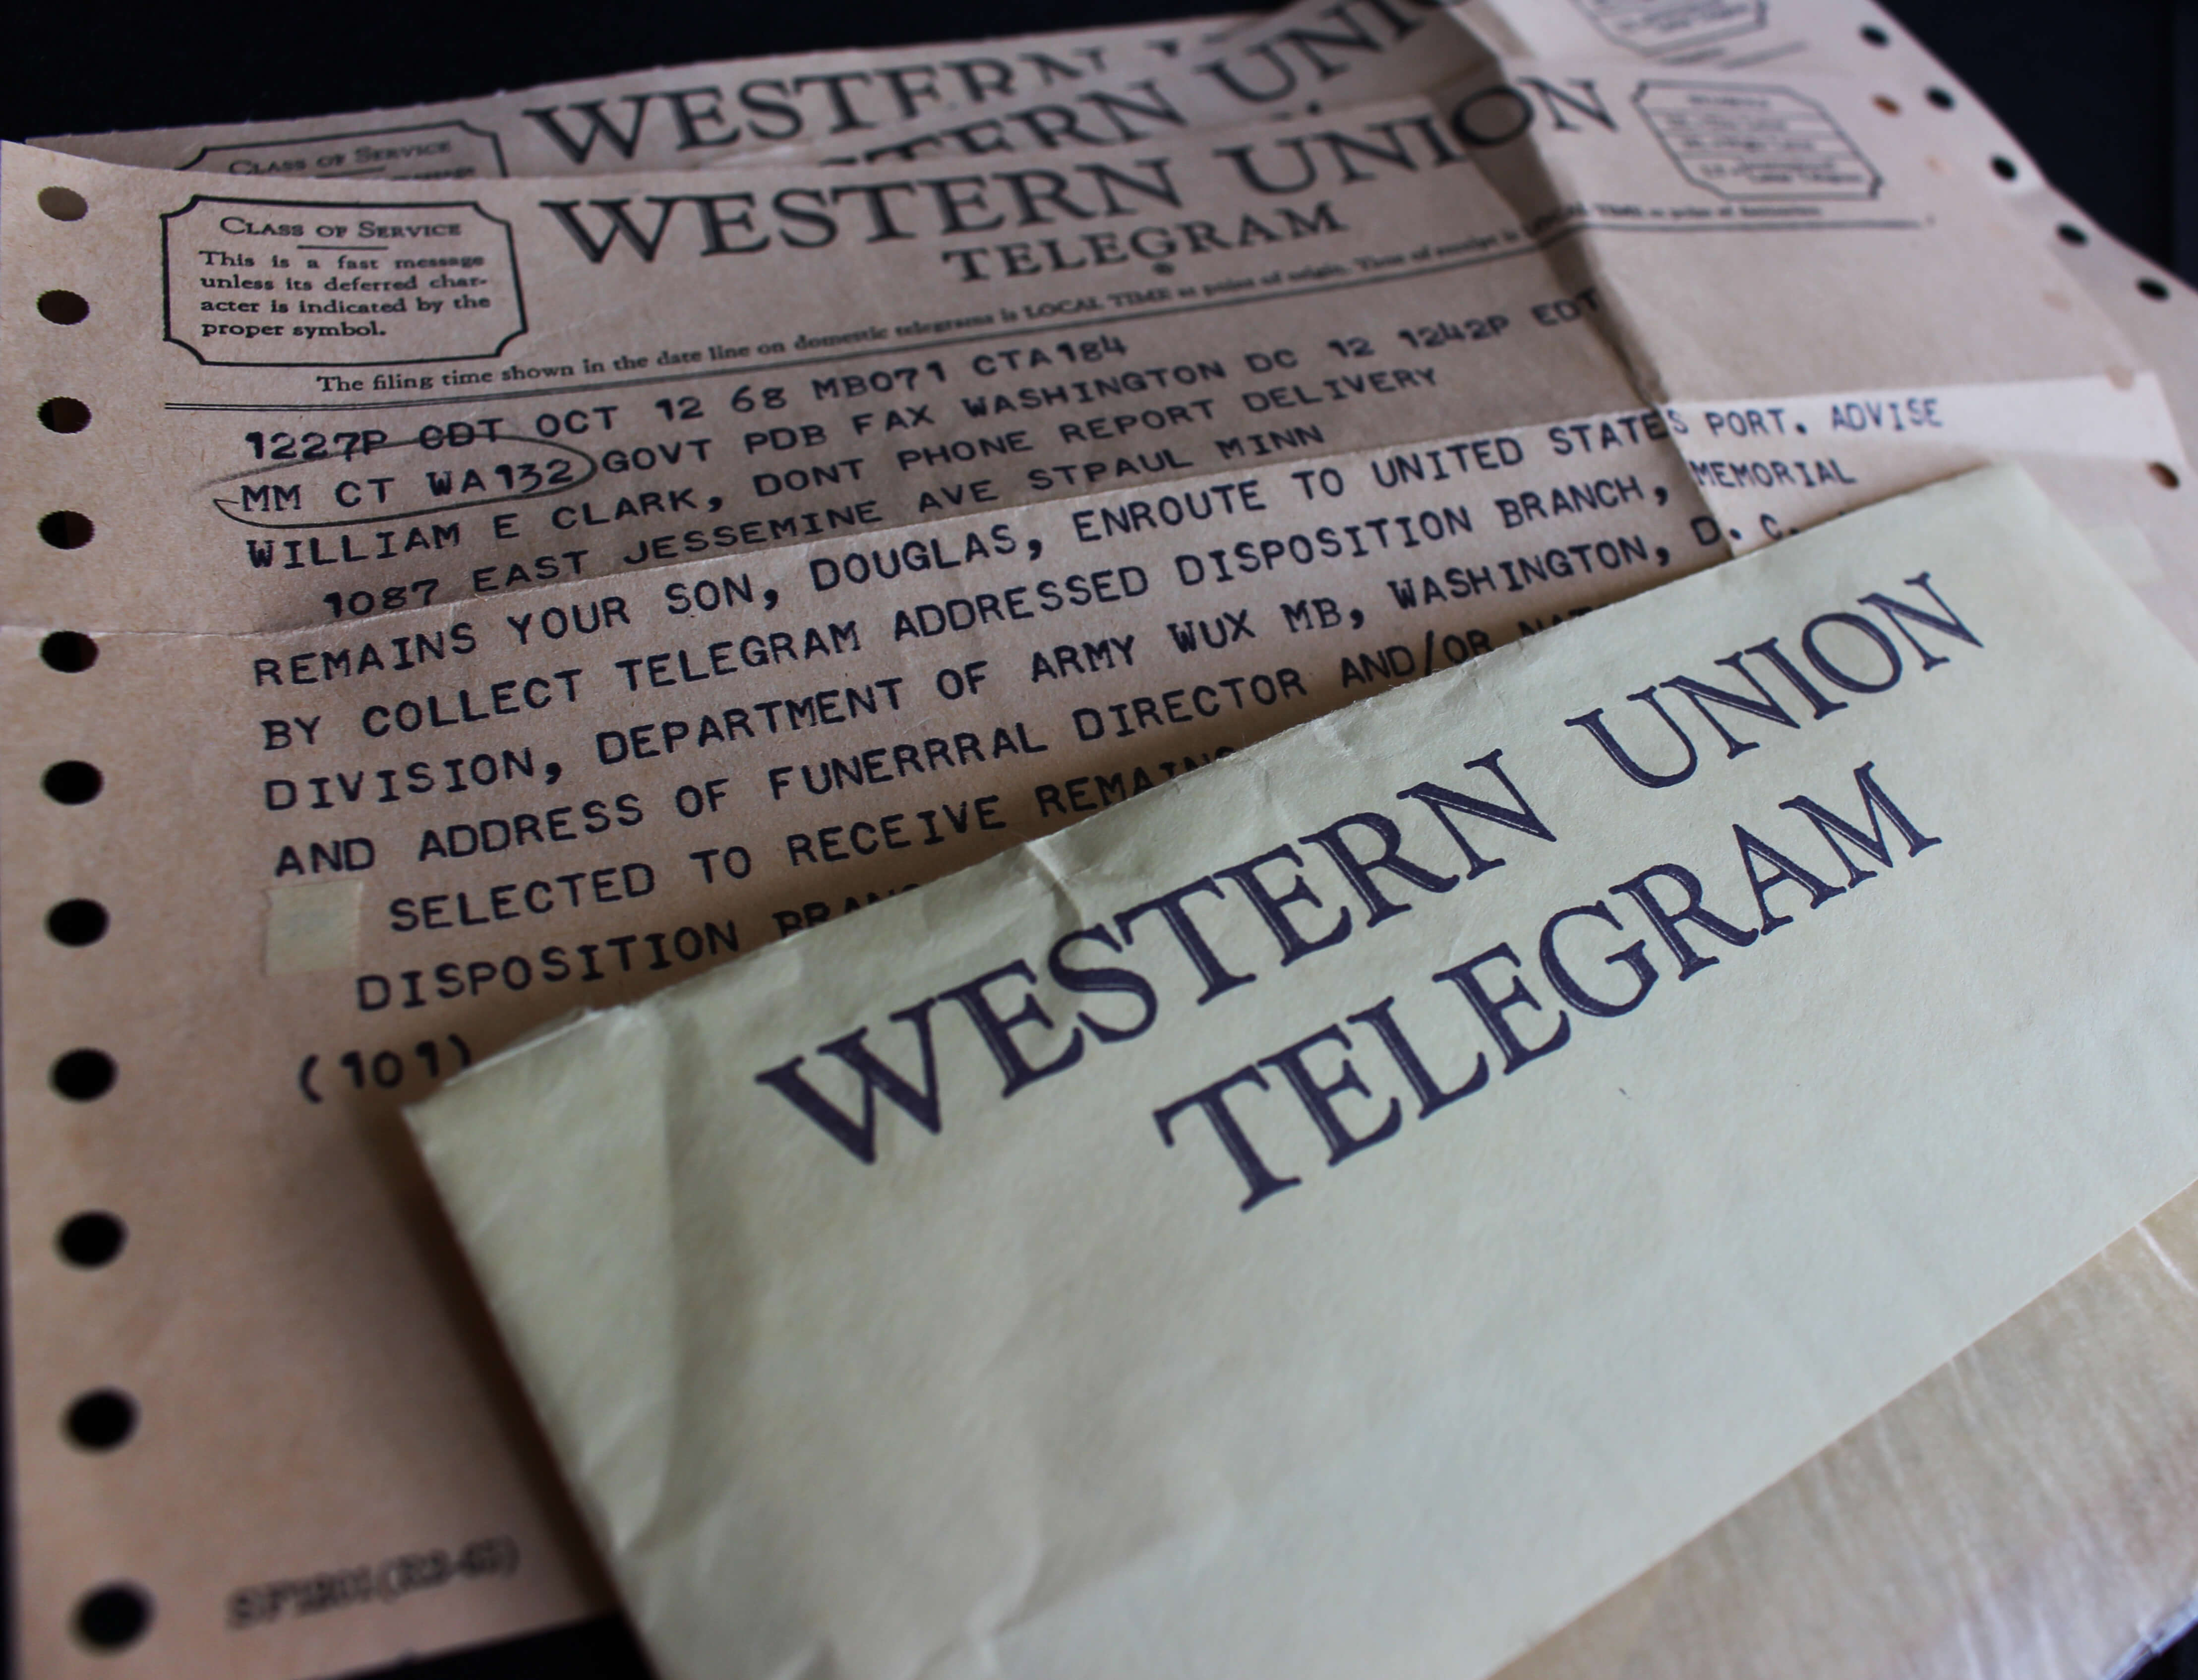 Western Union telegrams detailing that a son's remains will be sent to a funeral home in St. Paul.